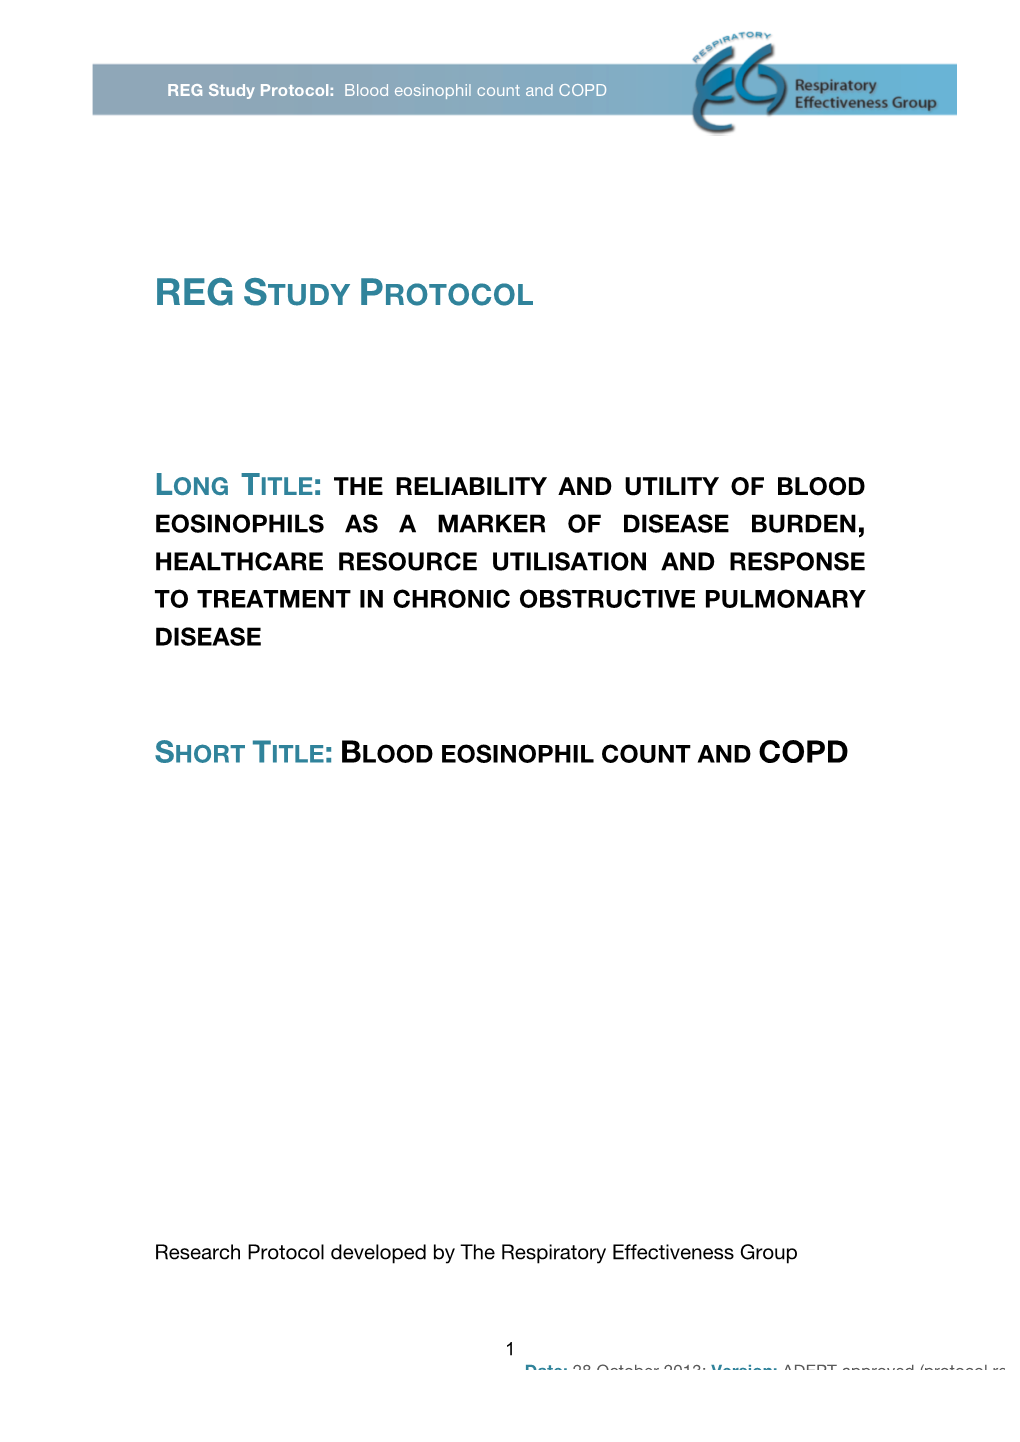 REG Study Protocol: Blood Eosinophil Count and COPD